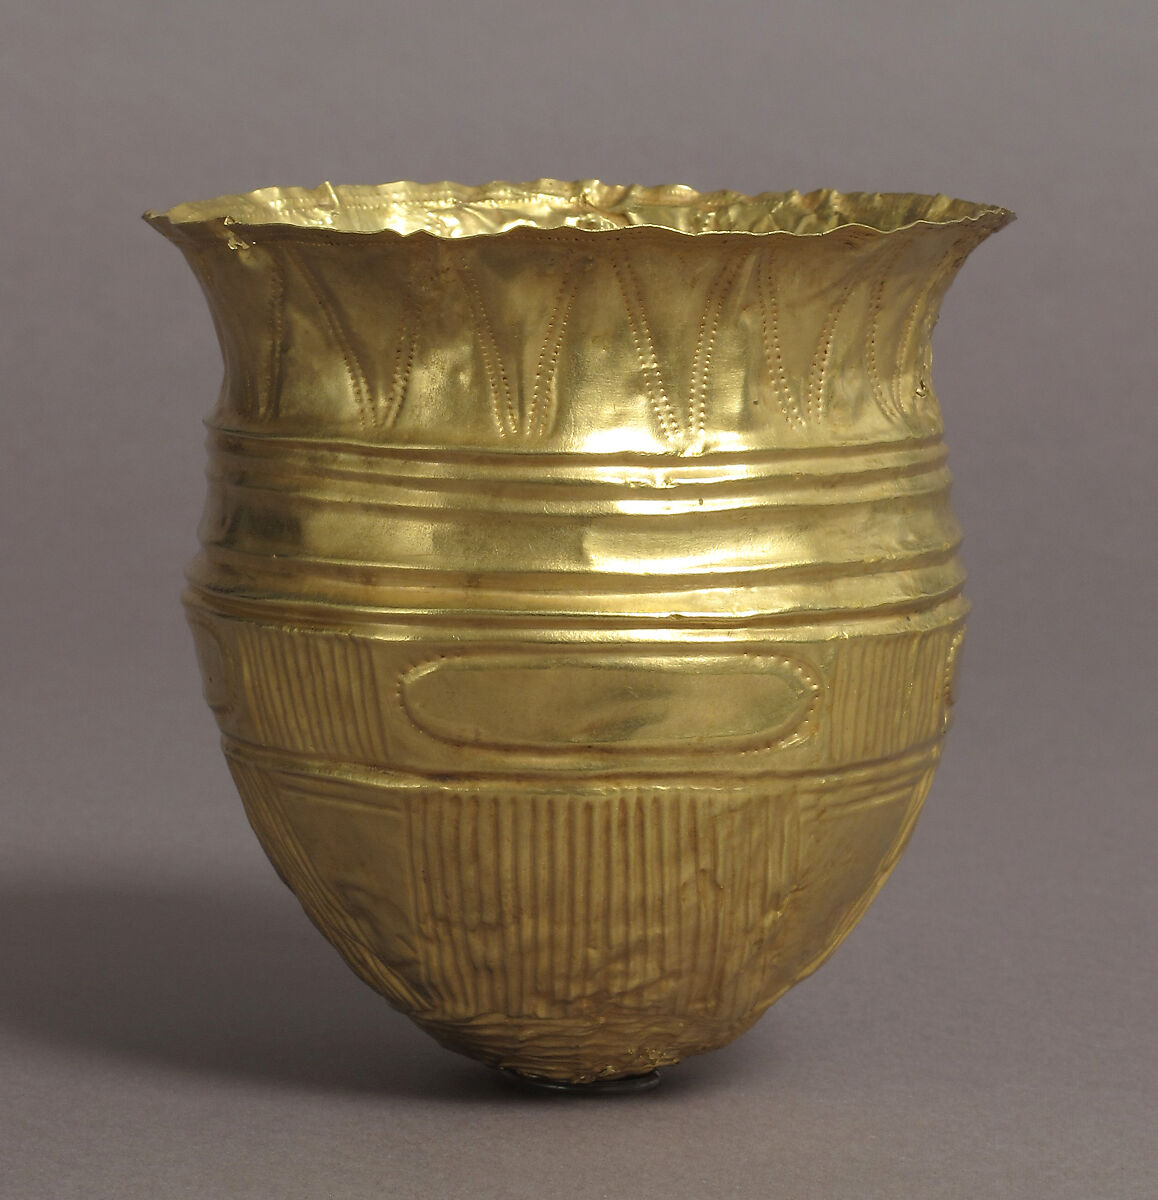 Vessel, Gold, Early Bronze Age 